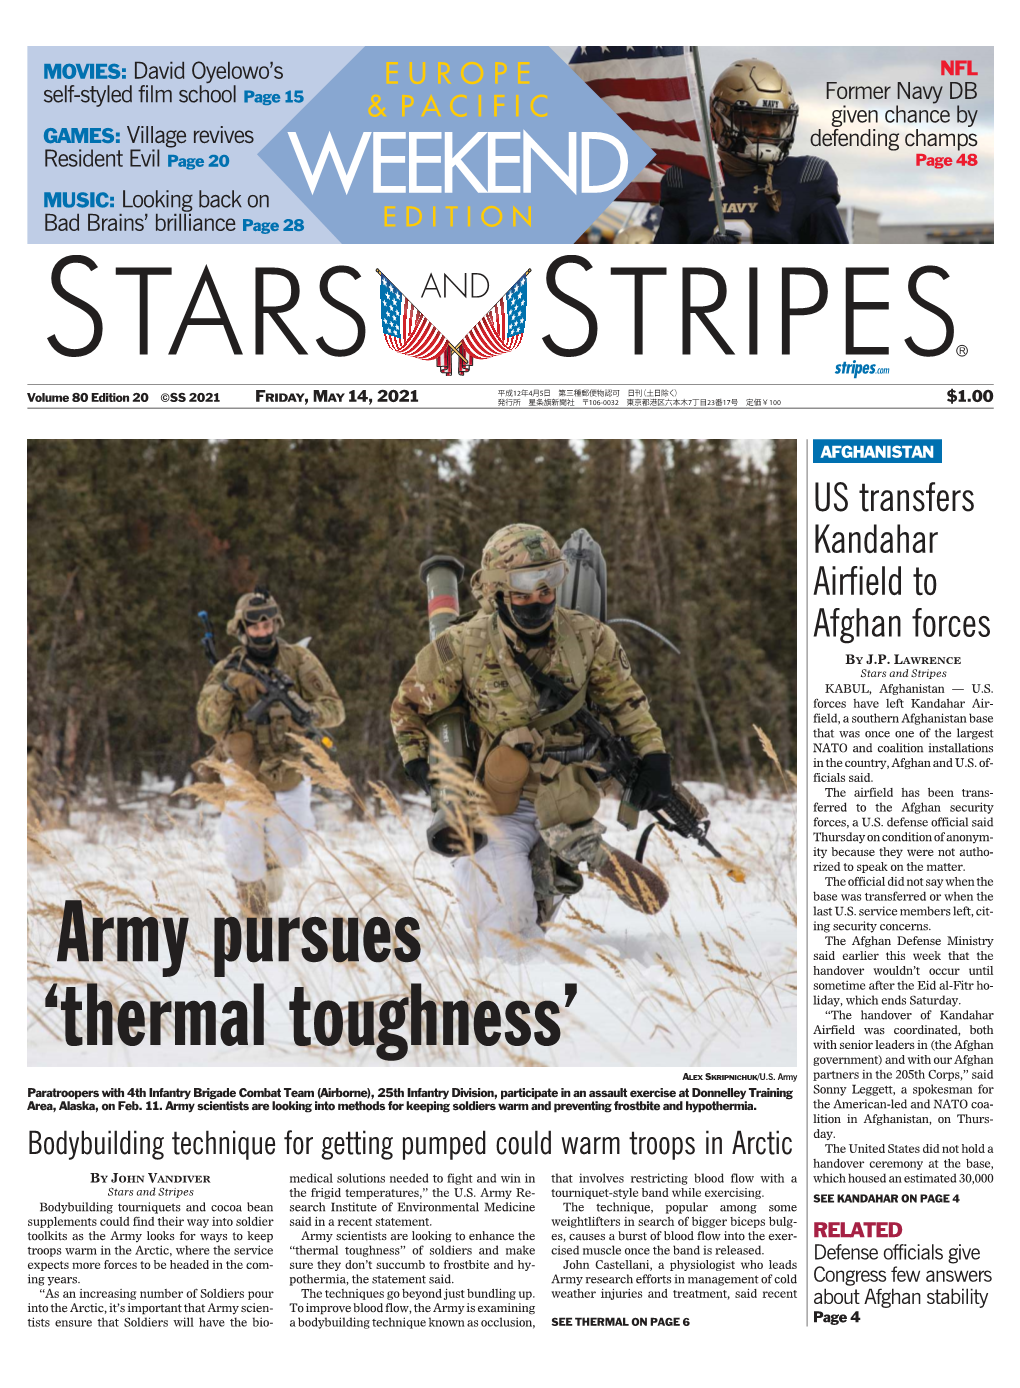 Army Pursues 'Thermal Toughness'